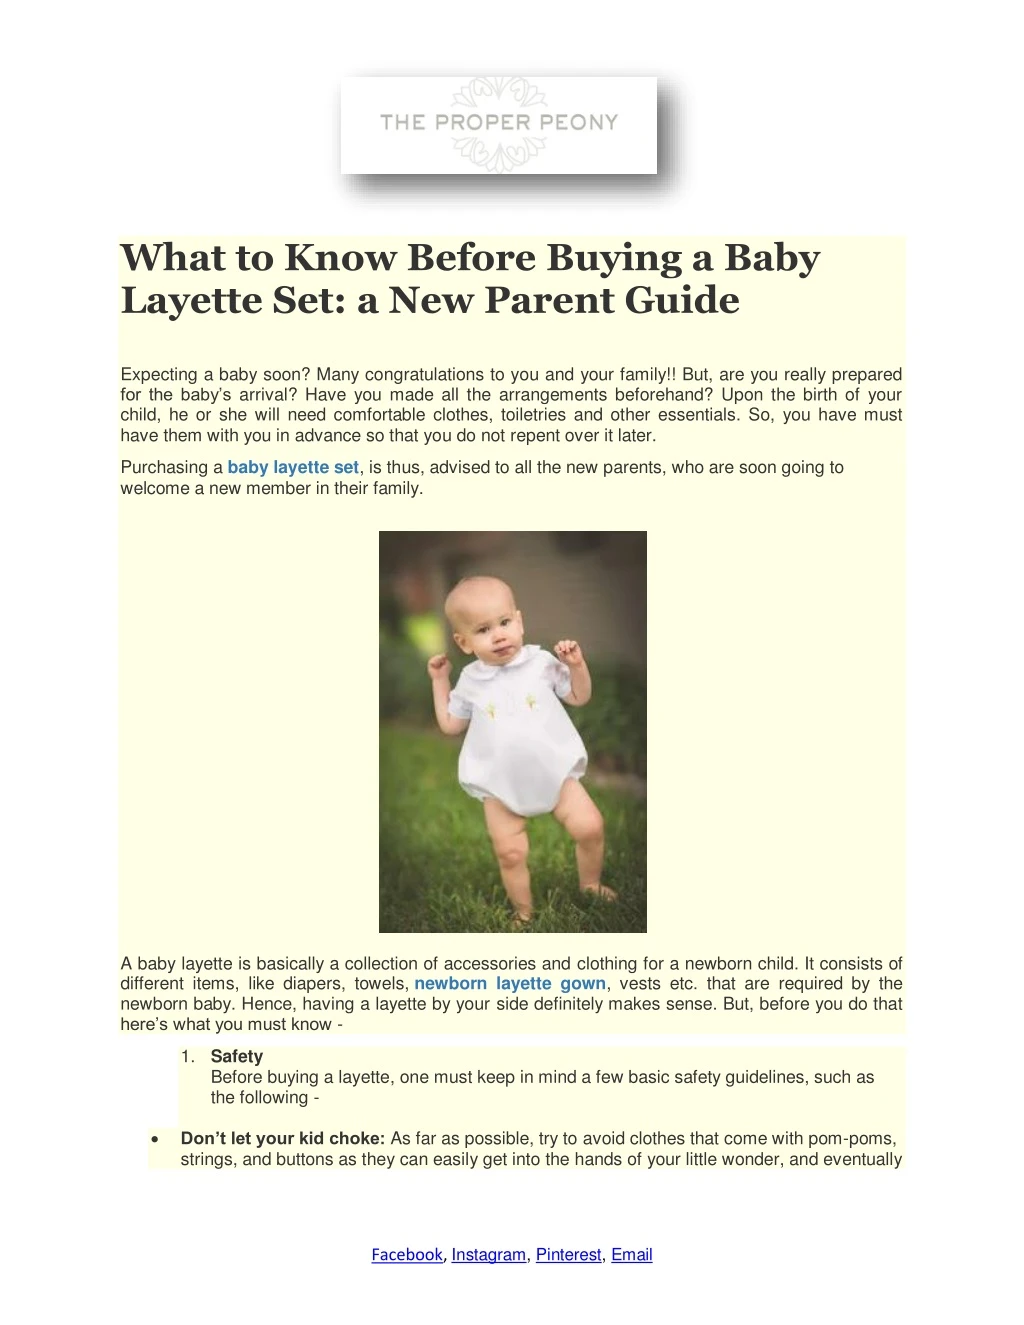 what to know before buying a baby layette